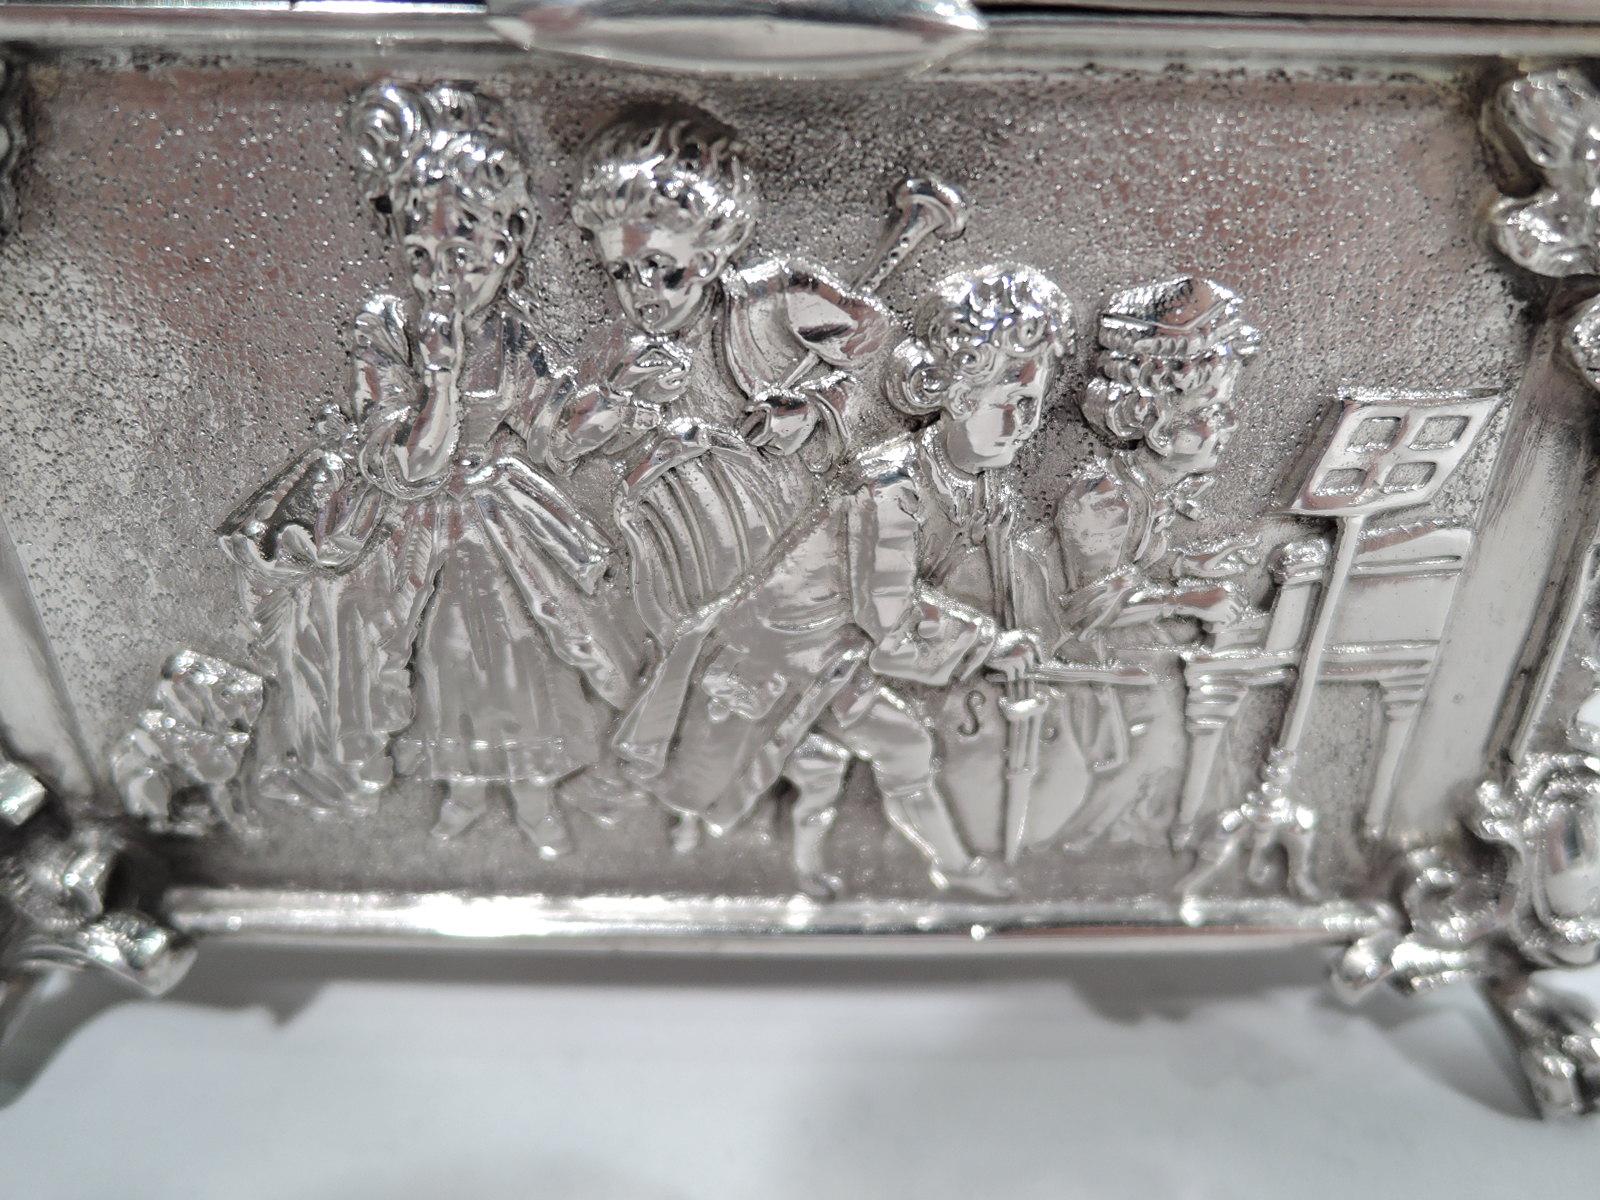 German Rococo 930 silver trinket box. Rectangular with straight sides and chamfered corners with wing-mounted monopodia supports. Cover hinged and raised with cast figural finial of boy in tricorn hat. Eighteenth-century scenes on sides. On front